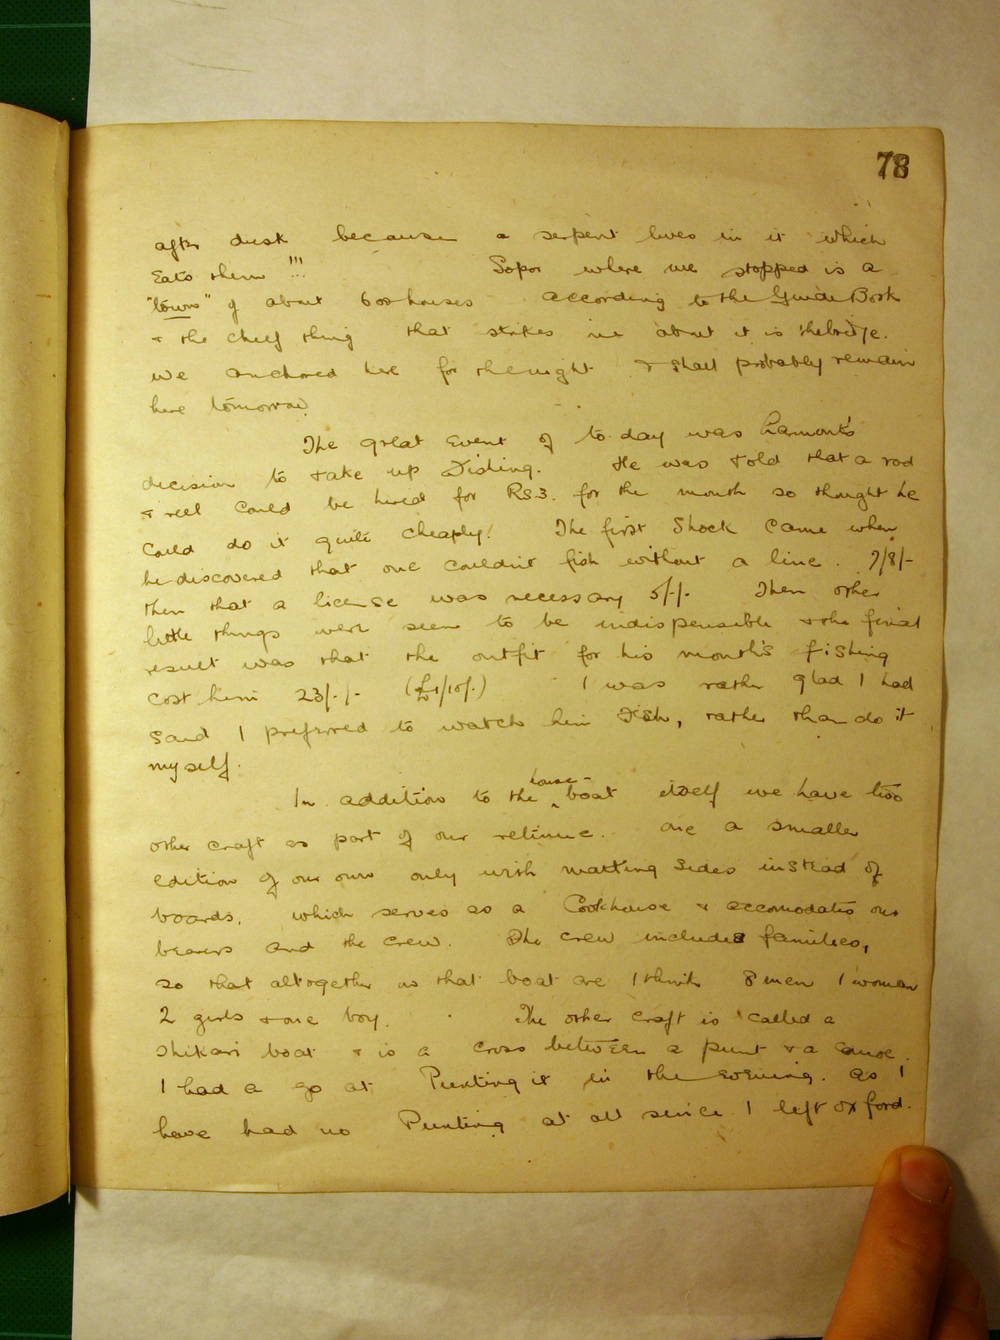 Scanned image of page book12 img_15651.jpg